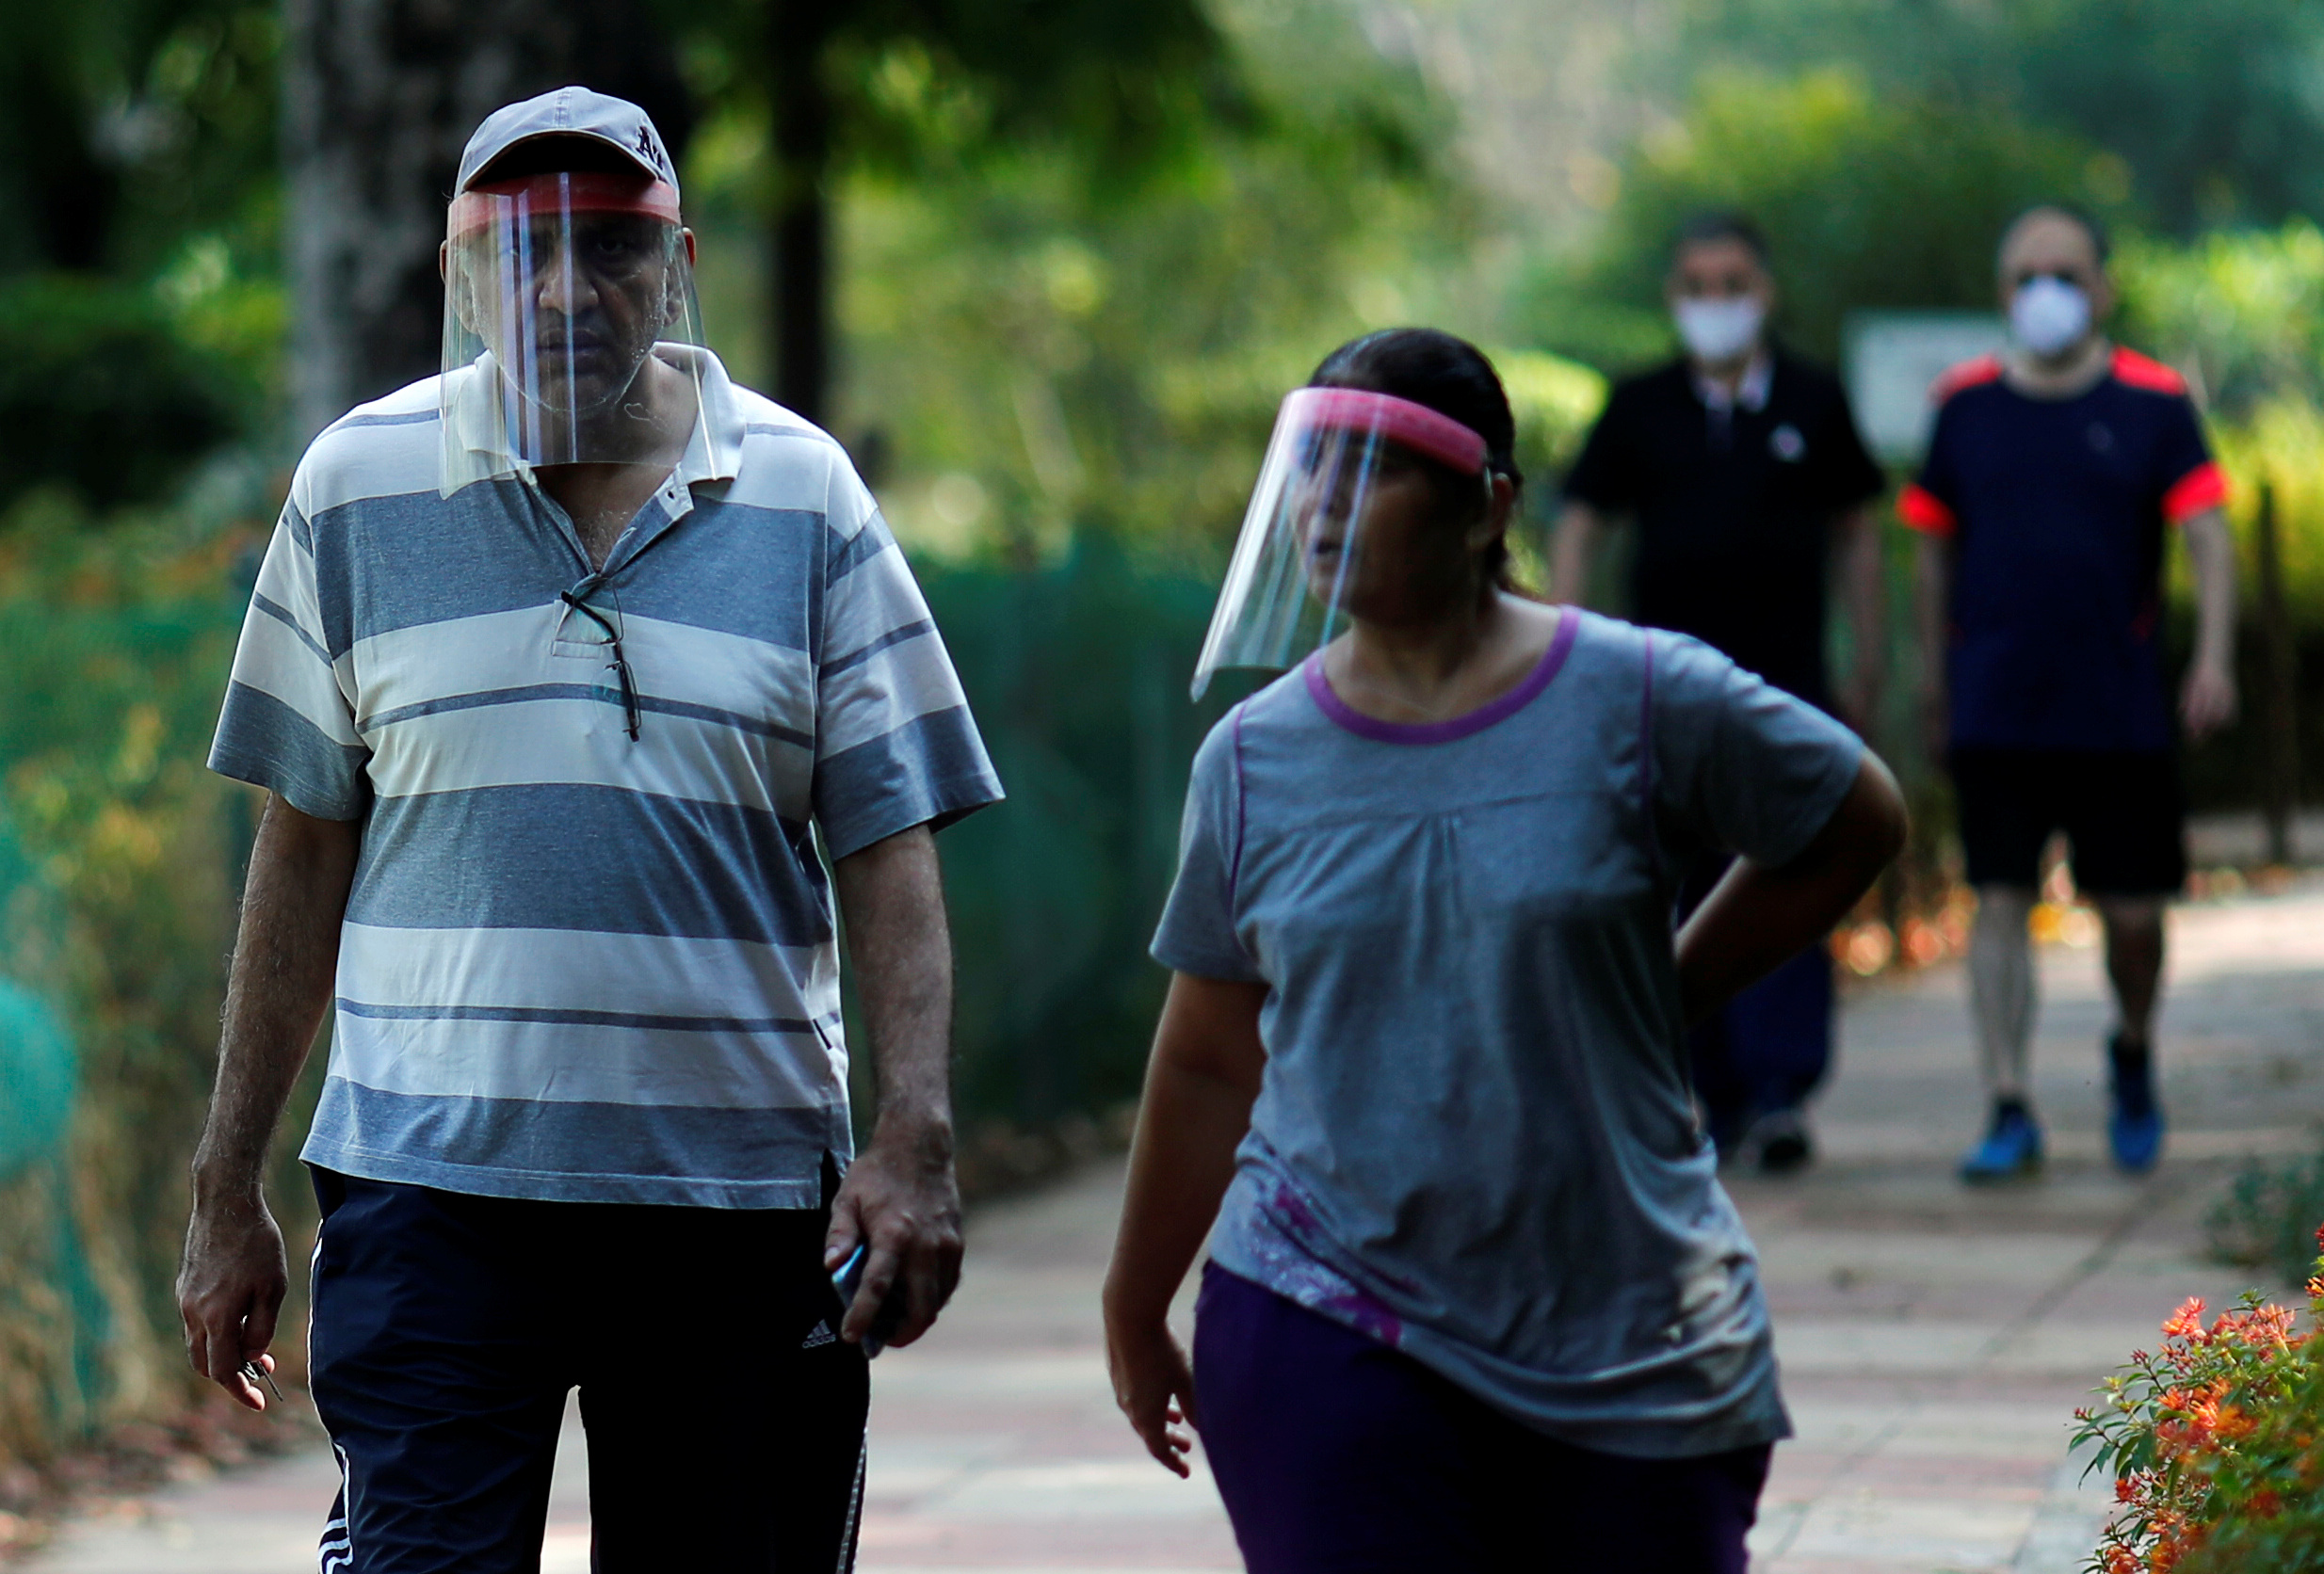 FILE PHOTO: People wearing protective face shields walk inside a park after few restrictions were lifted, during an extended nationwide lockdown to slow the spread of the coronavirus disease (COVID-19), in New Delhi, India, May 31, 2020. REUTERS/Adnan Abidi